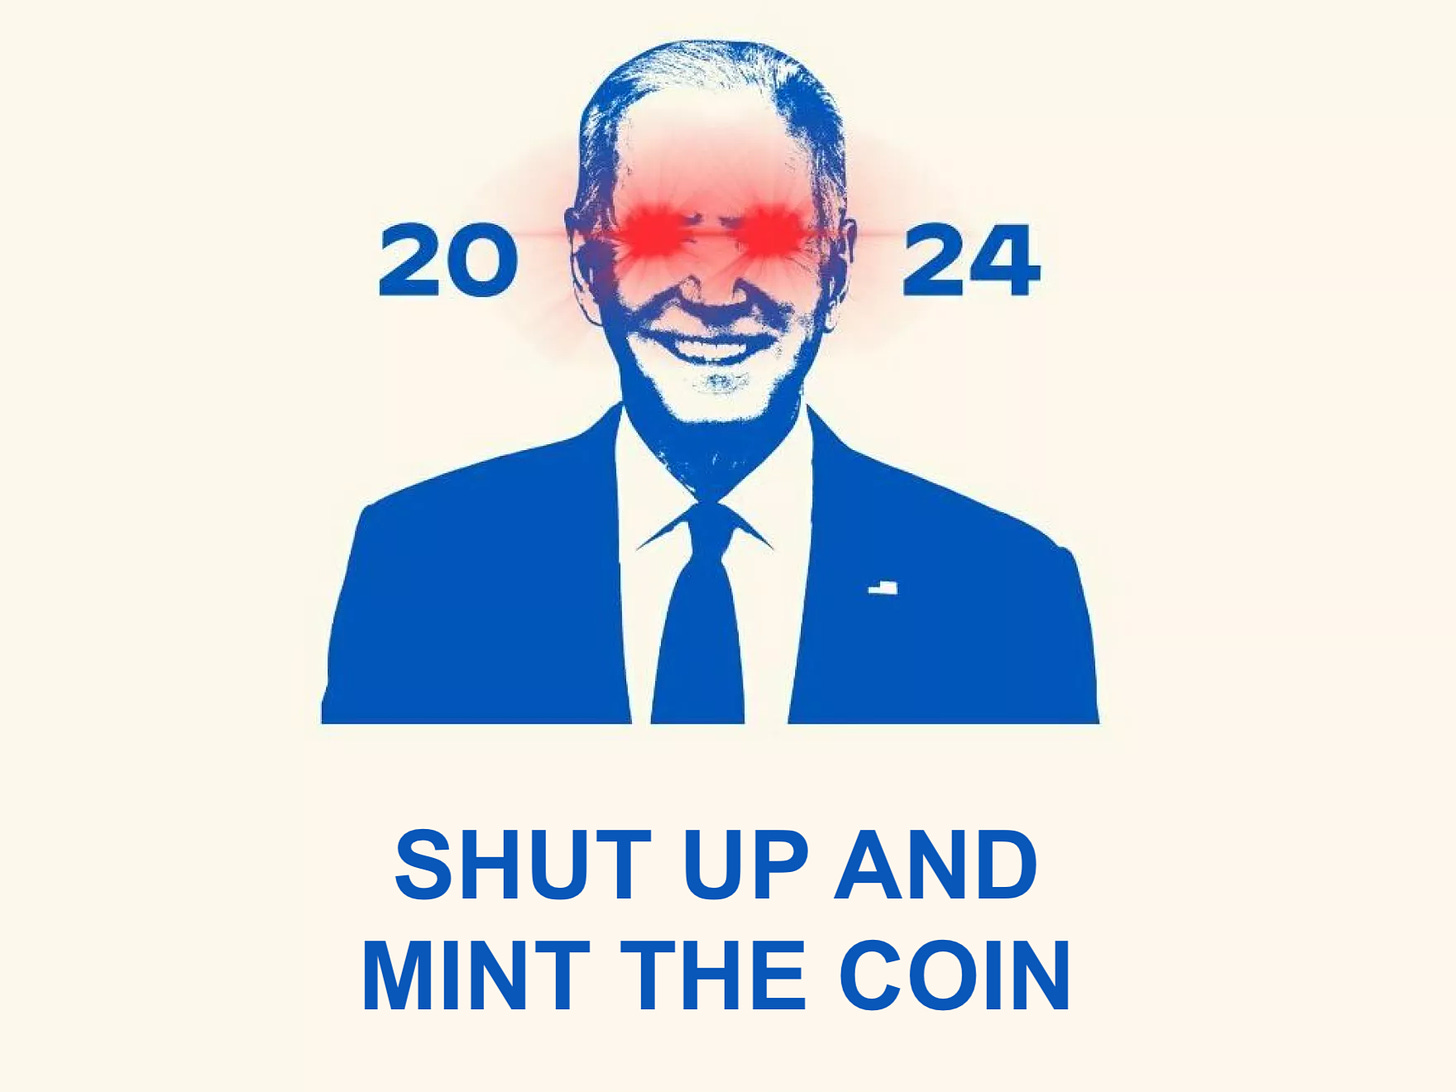 Dark Brandon "laser eyes" Joe Biden 2024 campaign image with the text "SHUT UP AND MINT THE COIN"